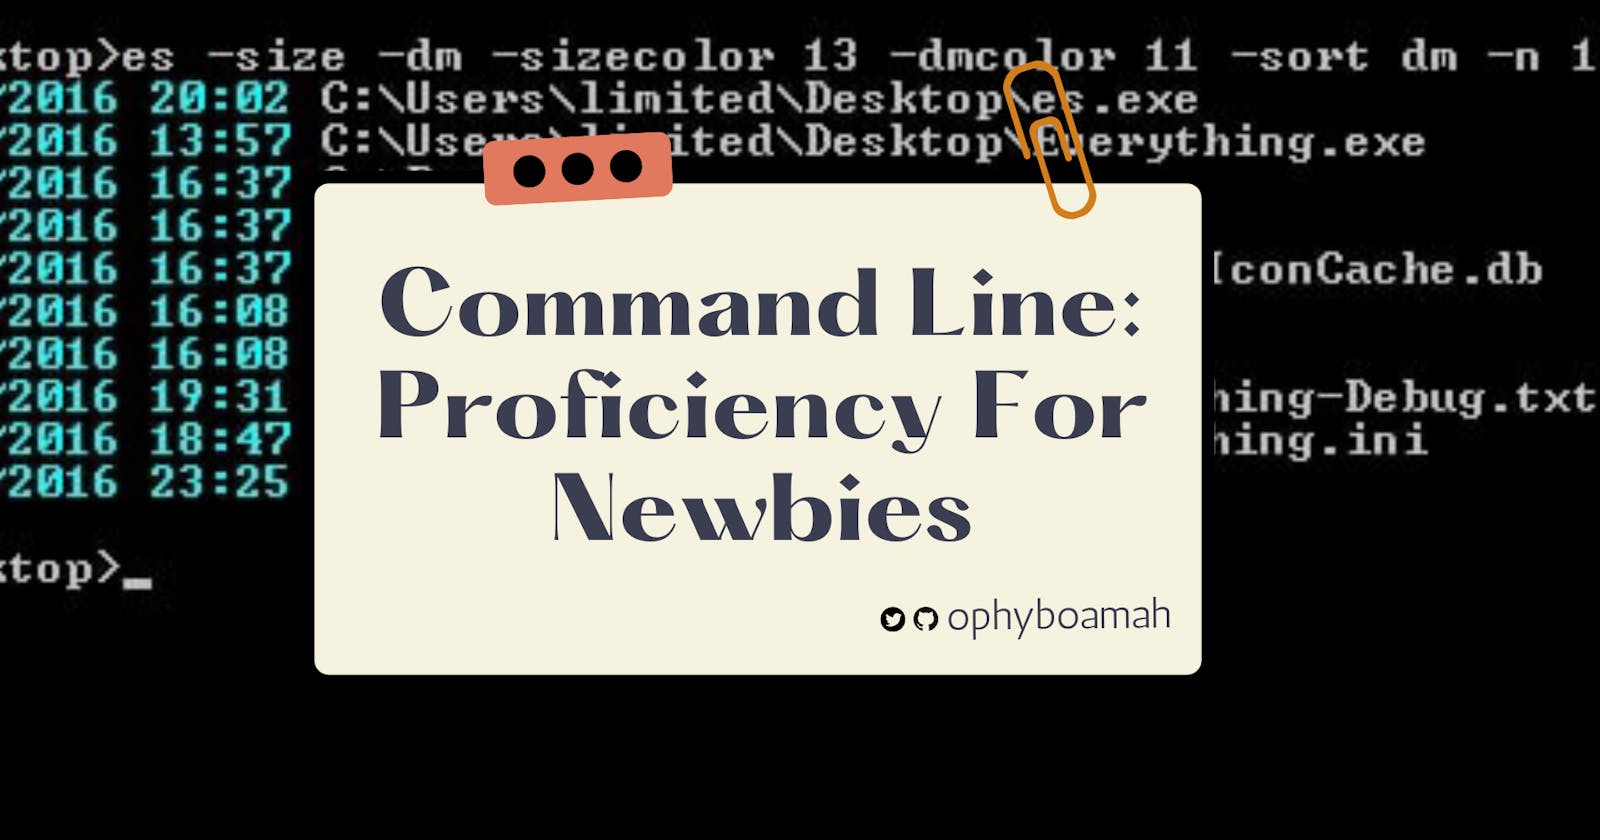 Command Line: Proficiency For Newbies